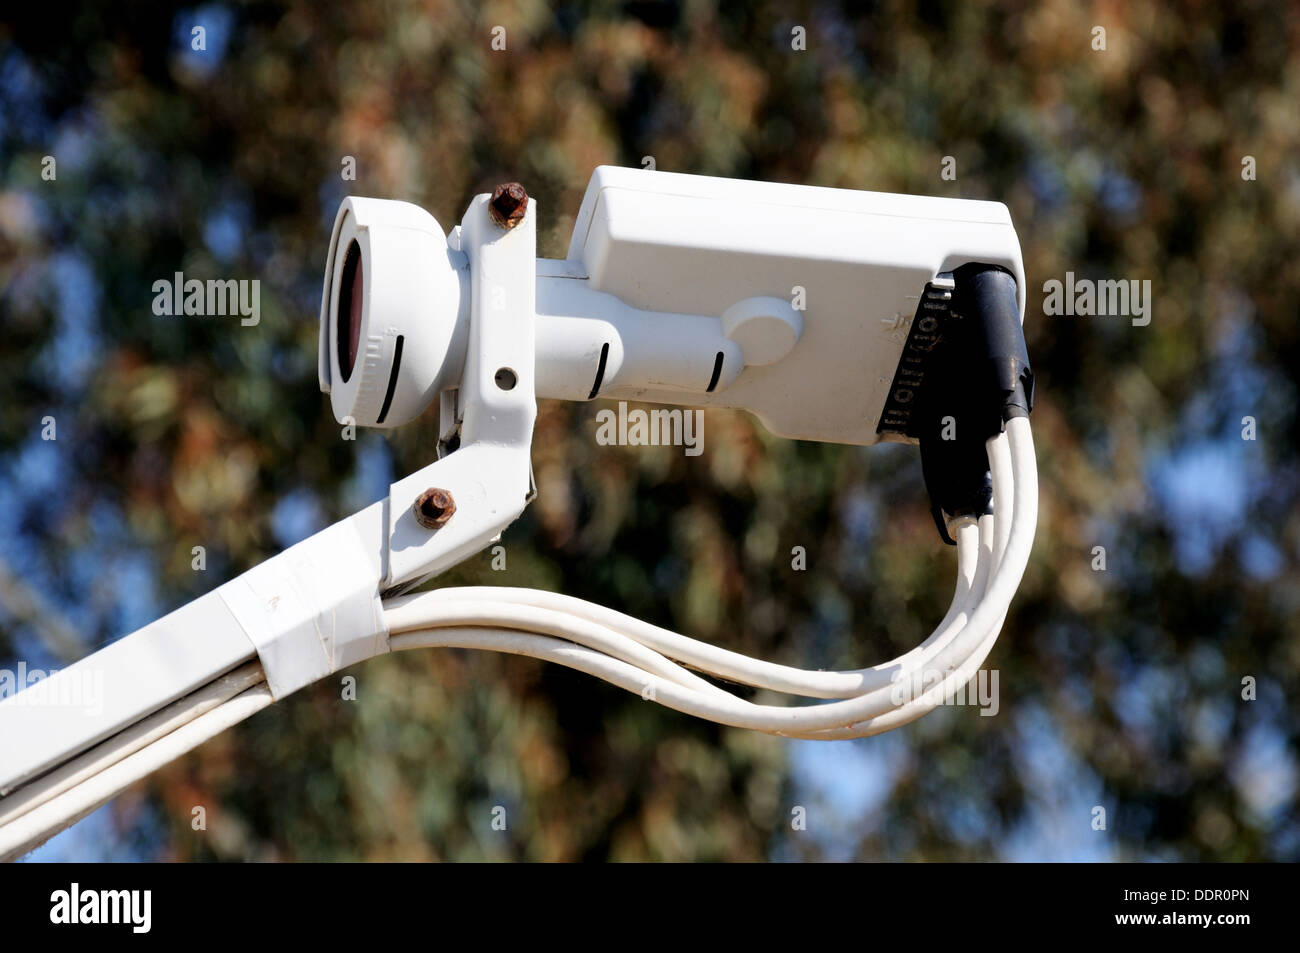 Four way LNB Antenna for Satellite TV, Costa del Sol, Andalucia, Spain, Western Europe. Stock Photo